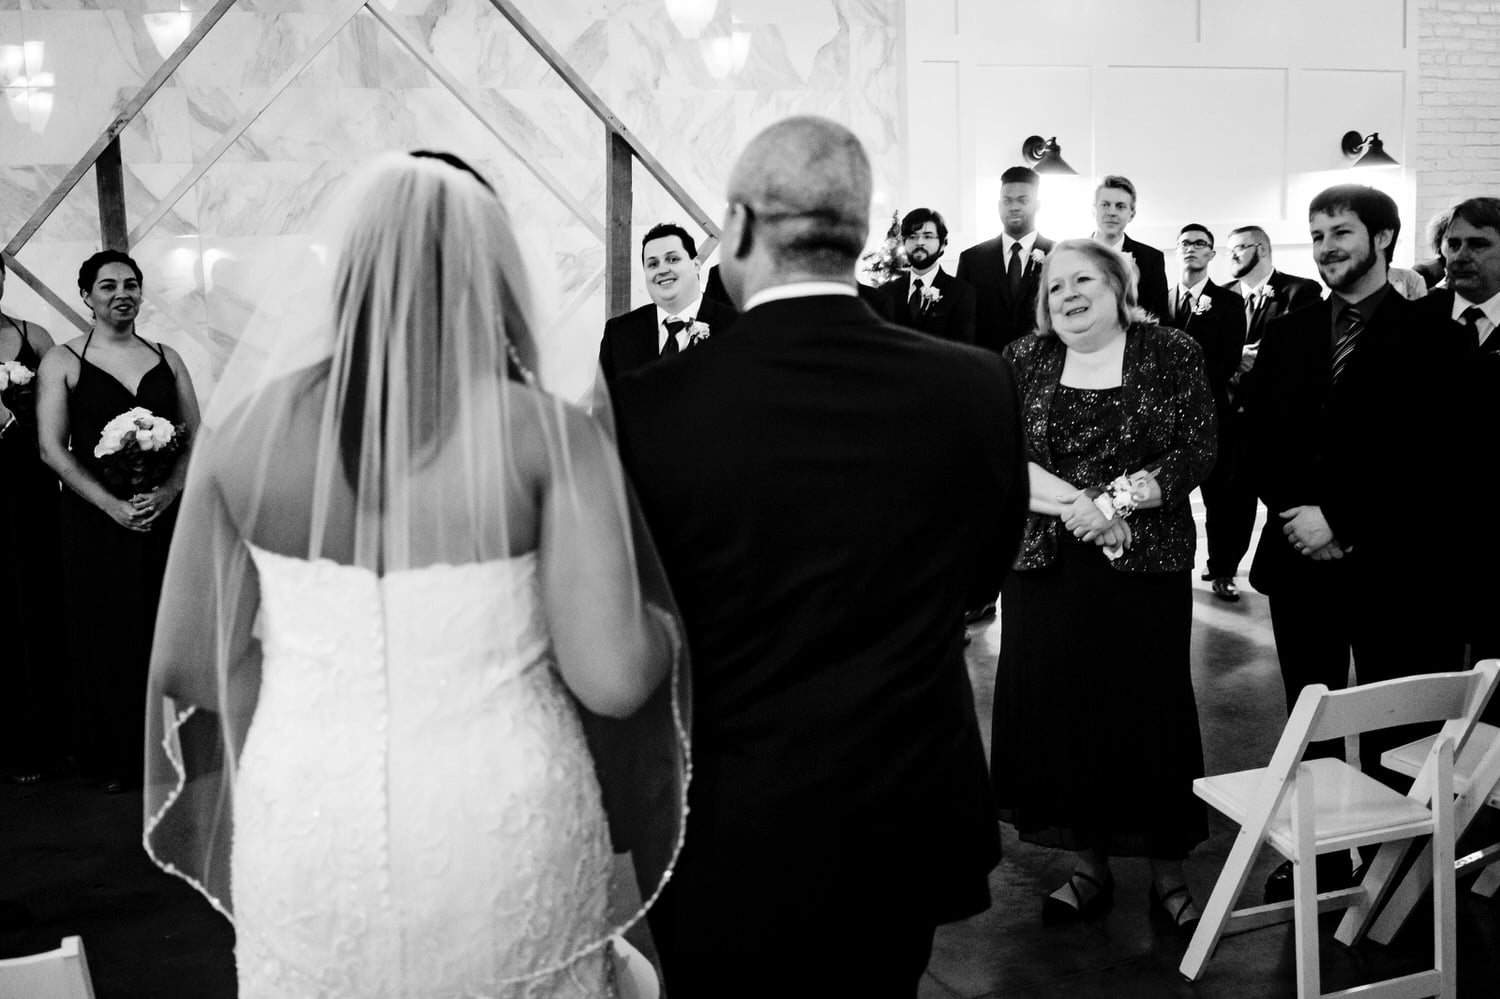 A candid black and white picture taken over the shoulder of the bride and her father as they approach her groom during a winter wedding ceremony at The Station in Kansas City. 